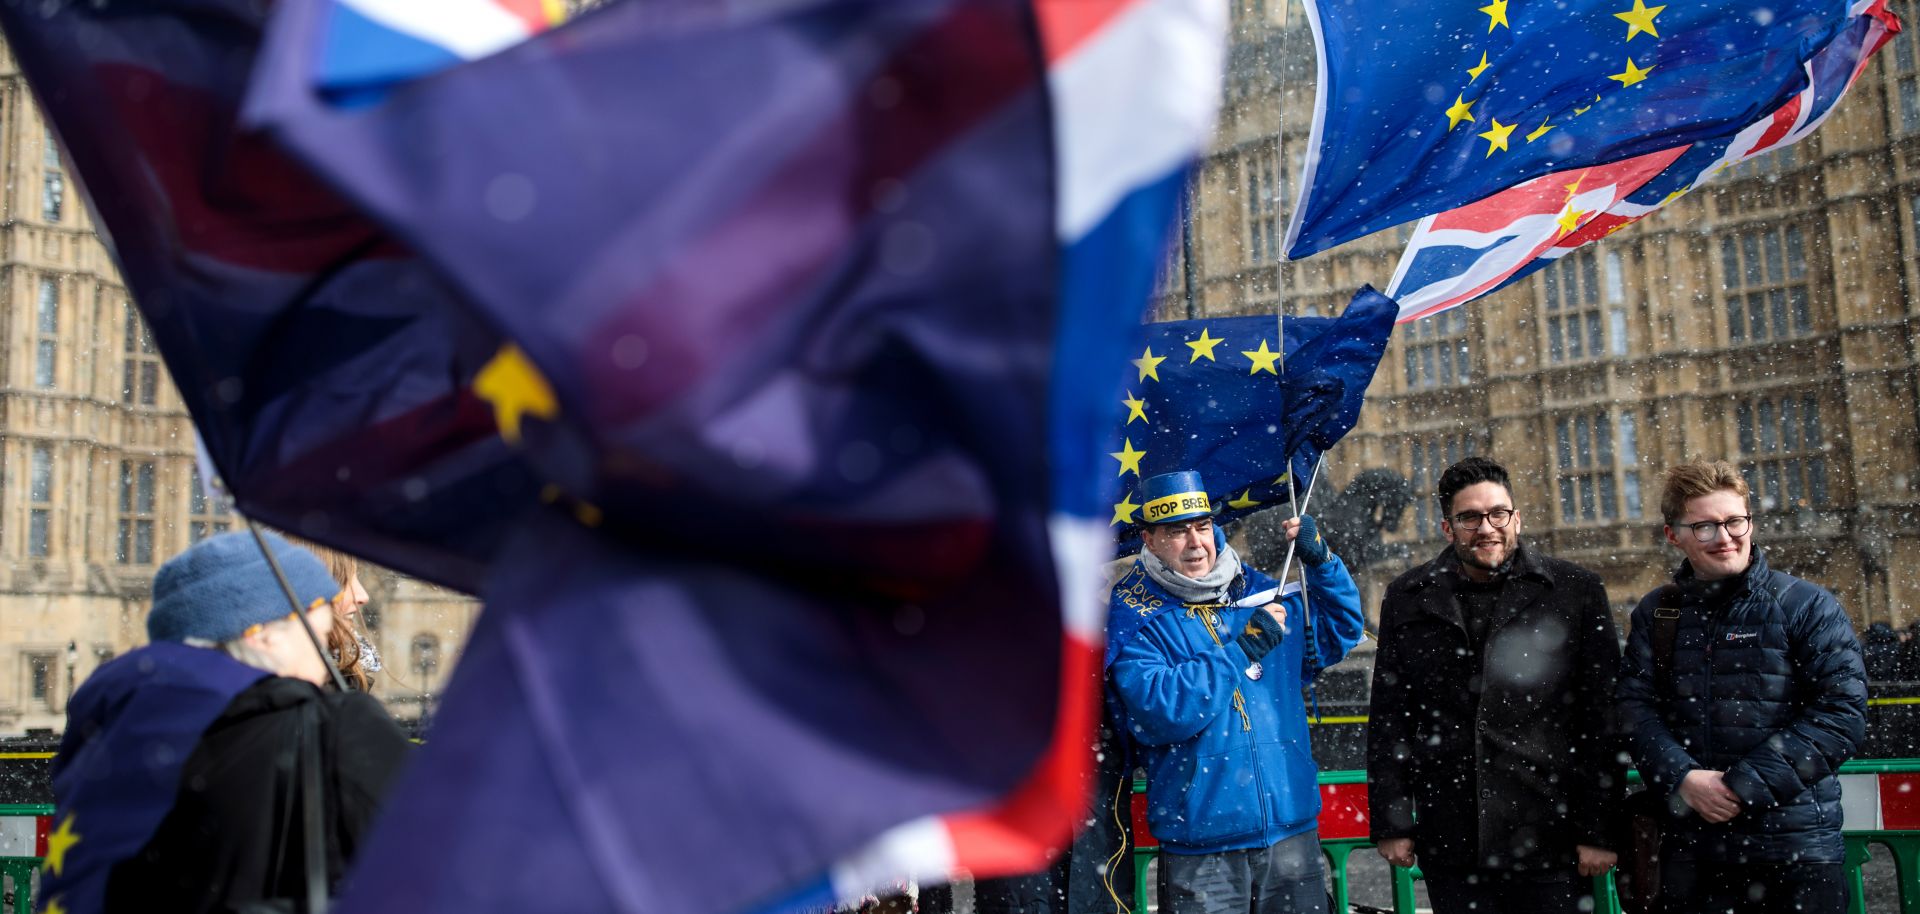 Demonstrators protest the United Kingdom's withdrawal from the European Union in front of the British Parliament building on Feb. 26, 2018.